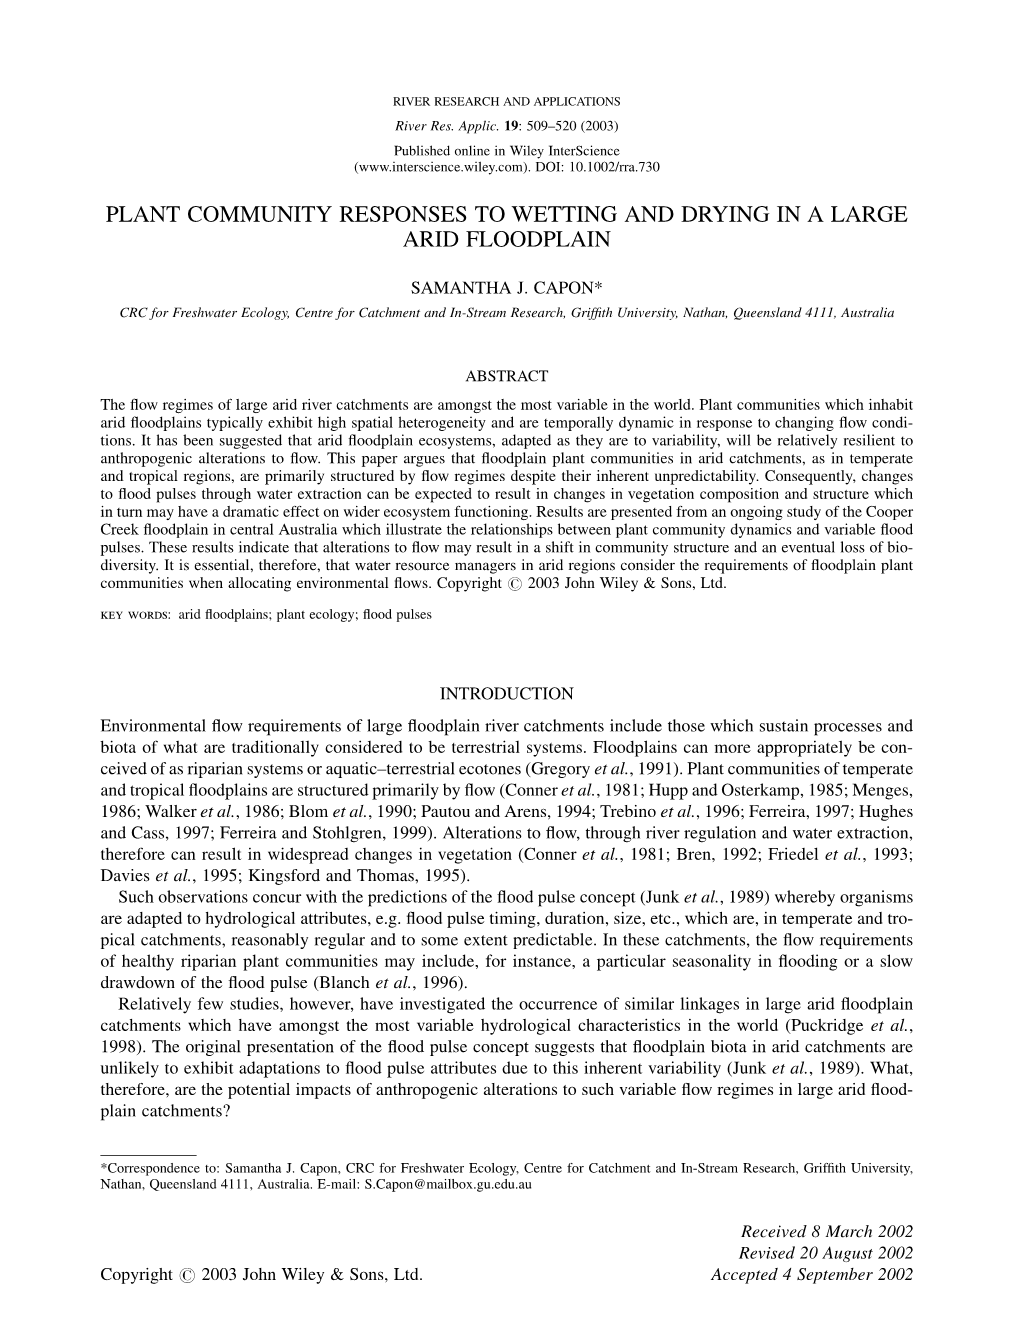 Plant Community Responses to Wetting and Drying in a Large Arid Floodplain